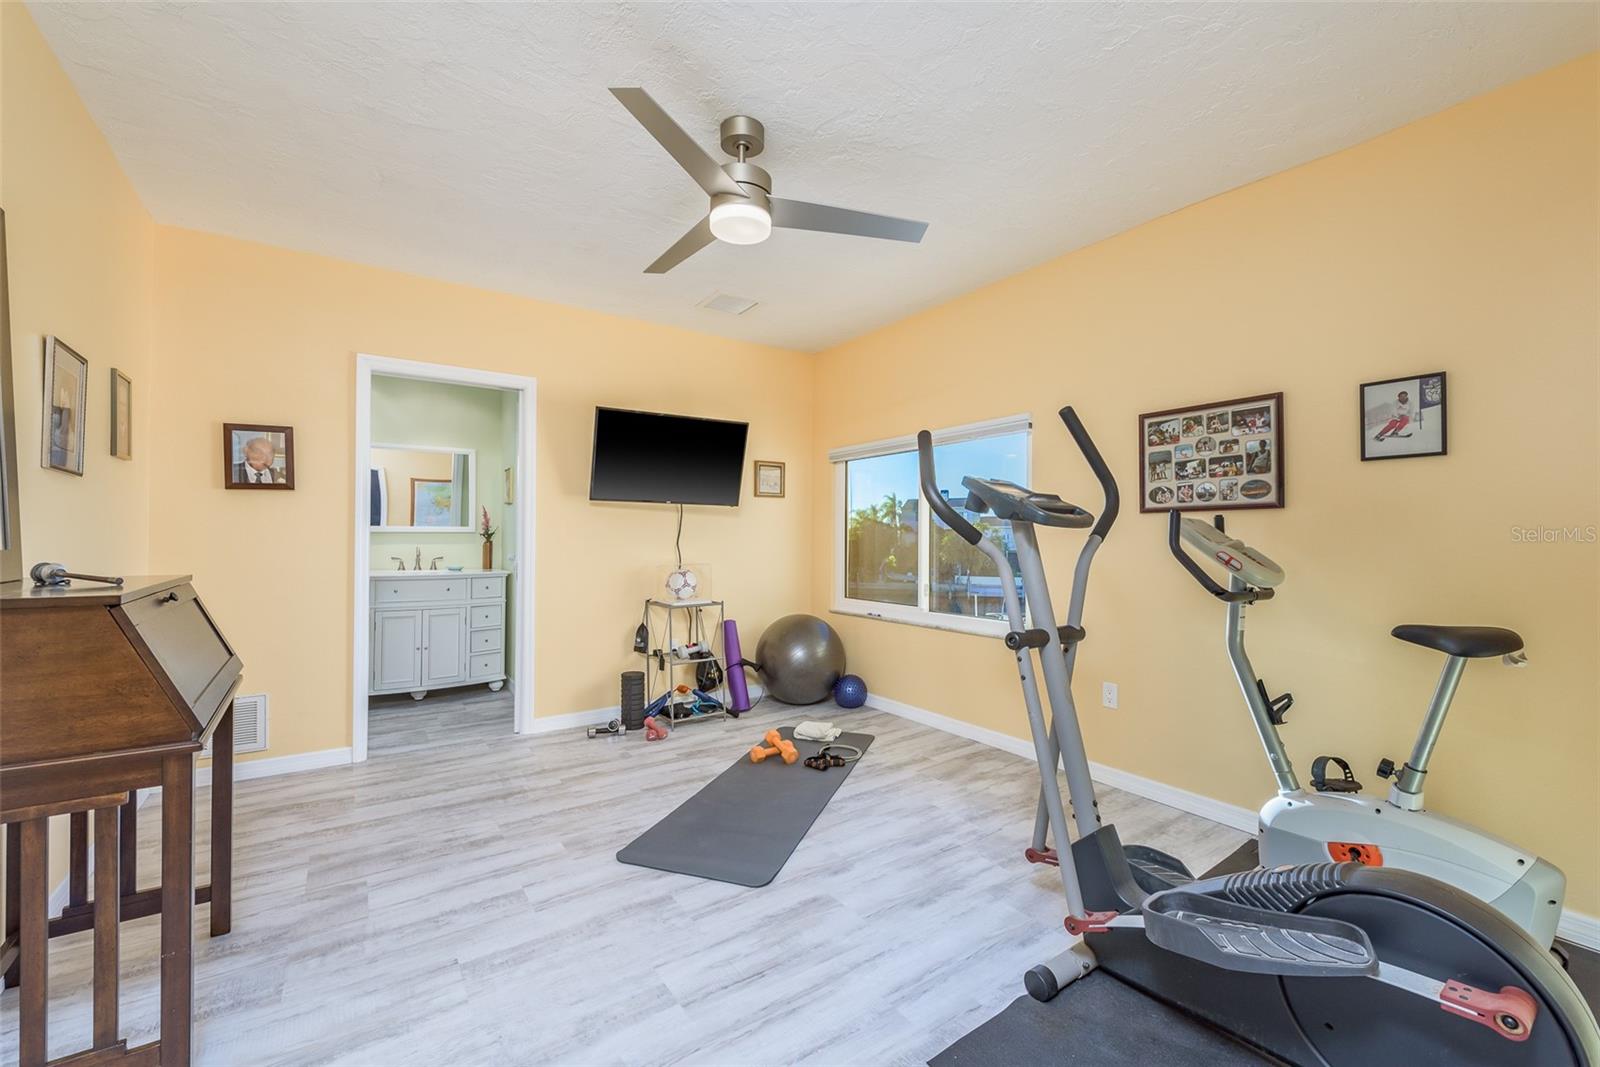 2nd Story Guest Bedroom 2/makes perfect home gym!